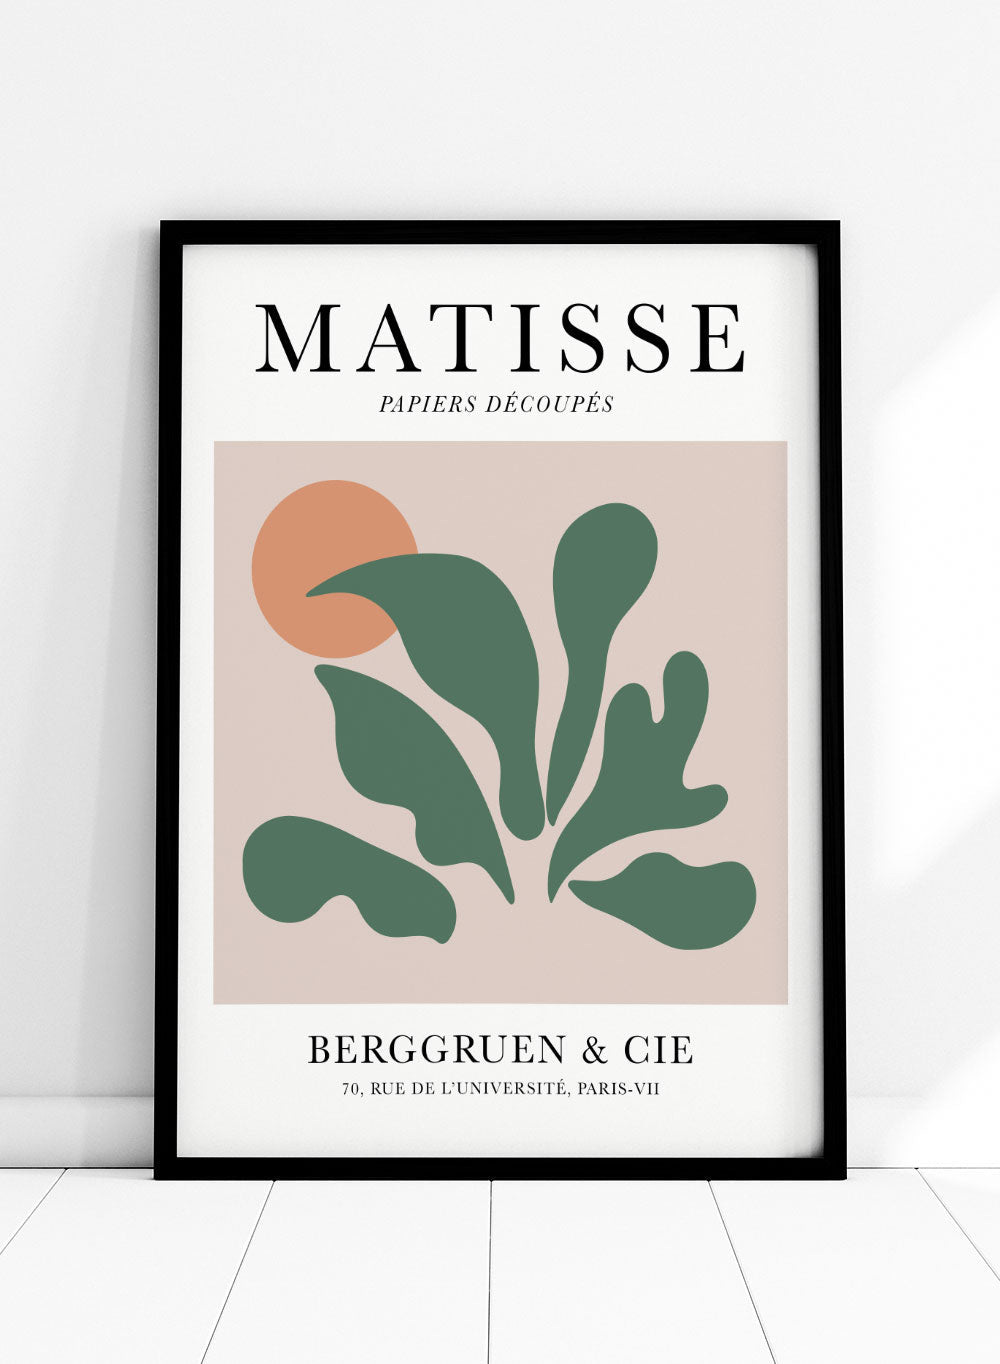 Henri Matisse, The Cut-Outs Series - Exhibition Poster No. 18